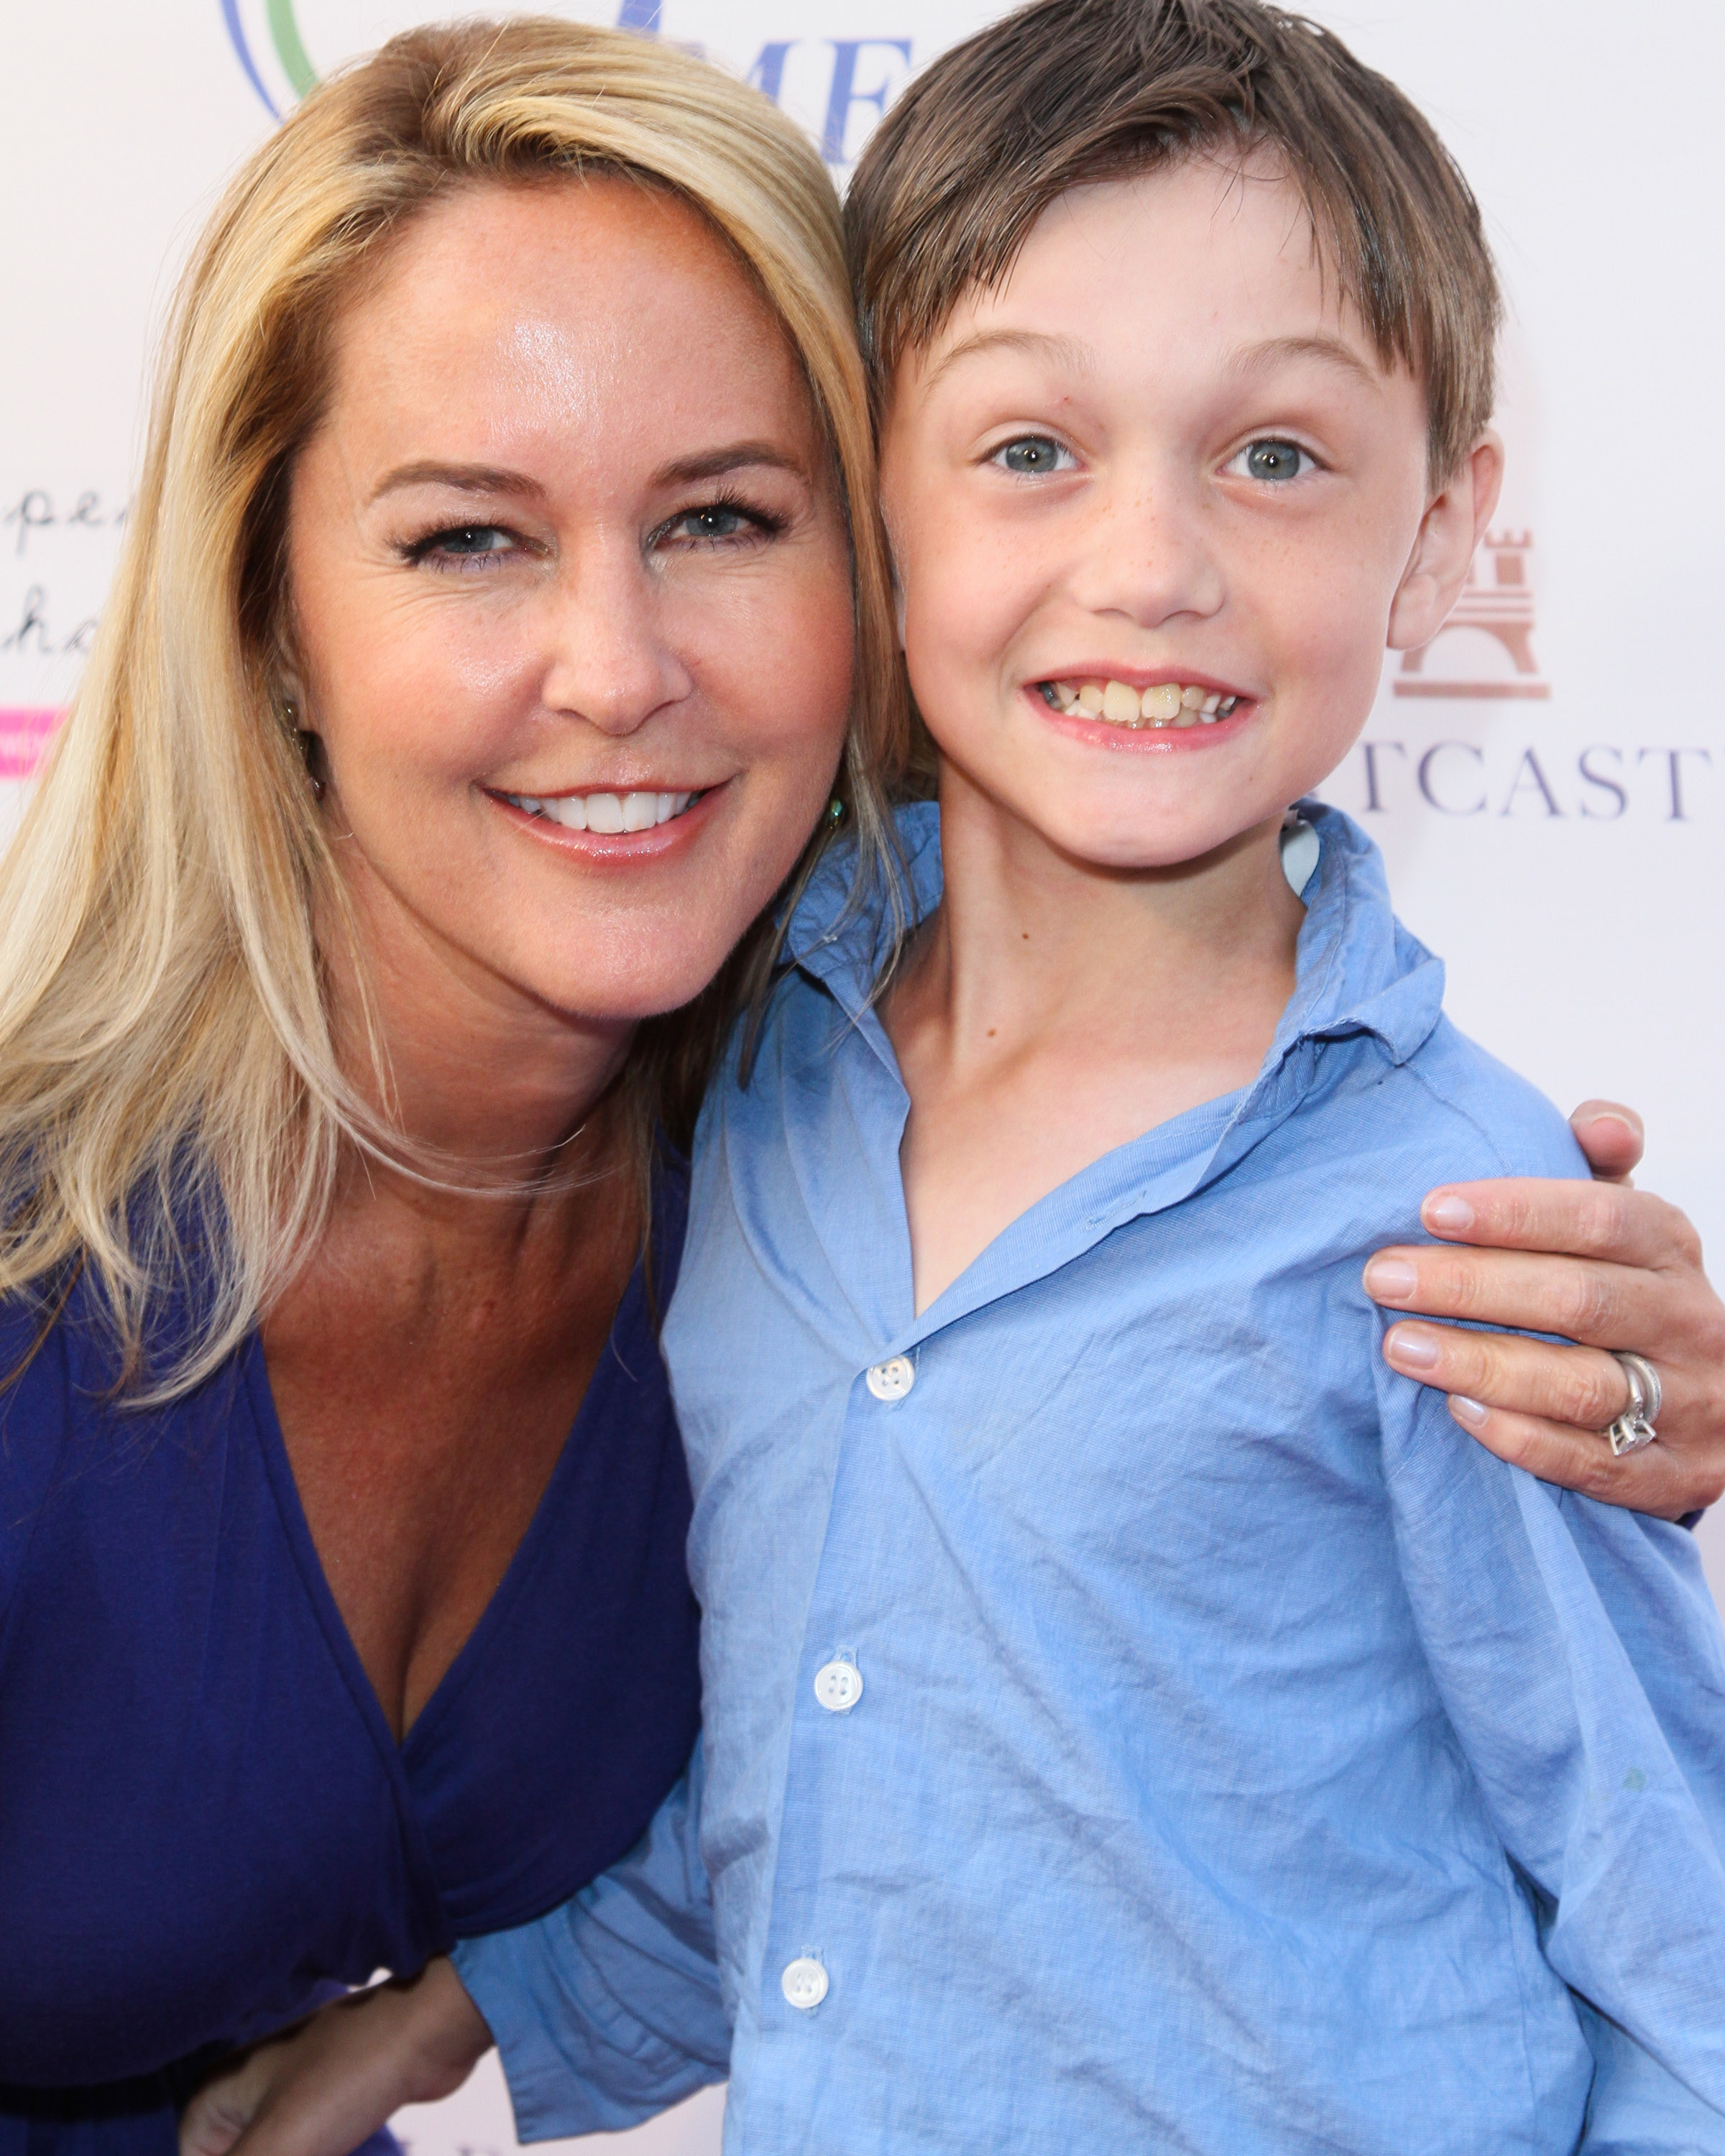 Erin Murphy and her son at the Maternal Fetal Care International Mother's Day fashion show on May 6, 2011, in Santa Monica, California | Source: Getty Images